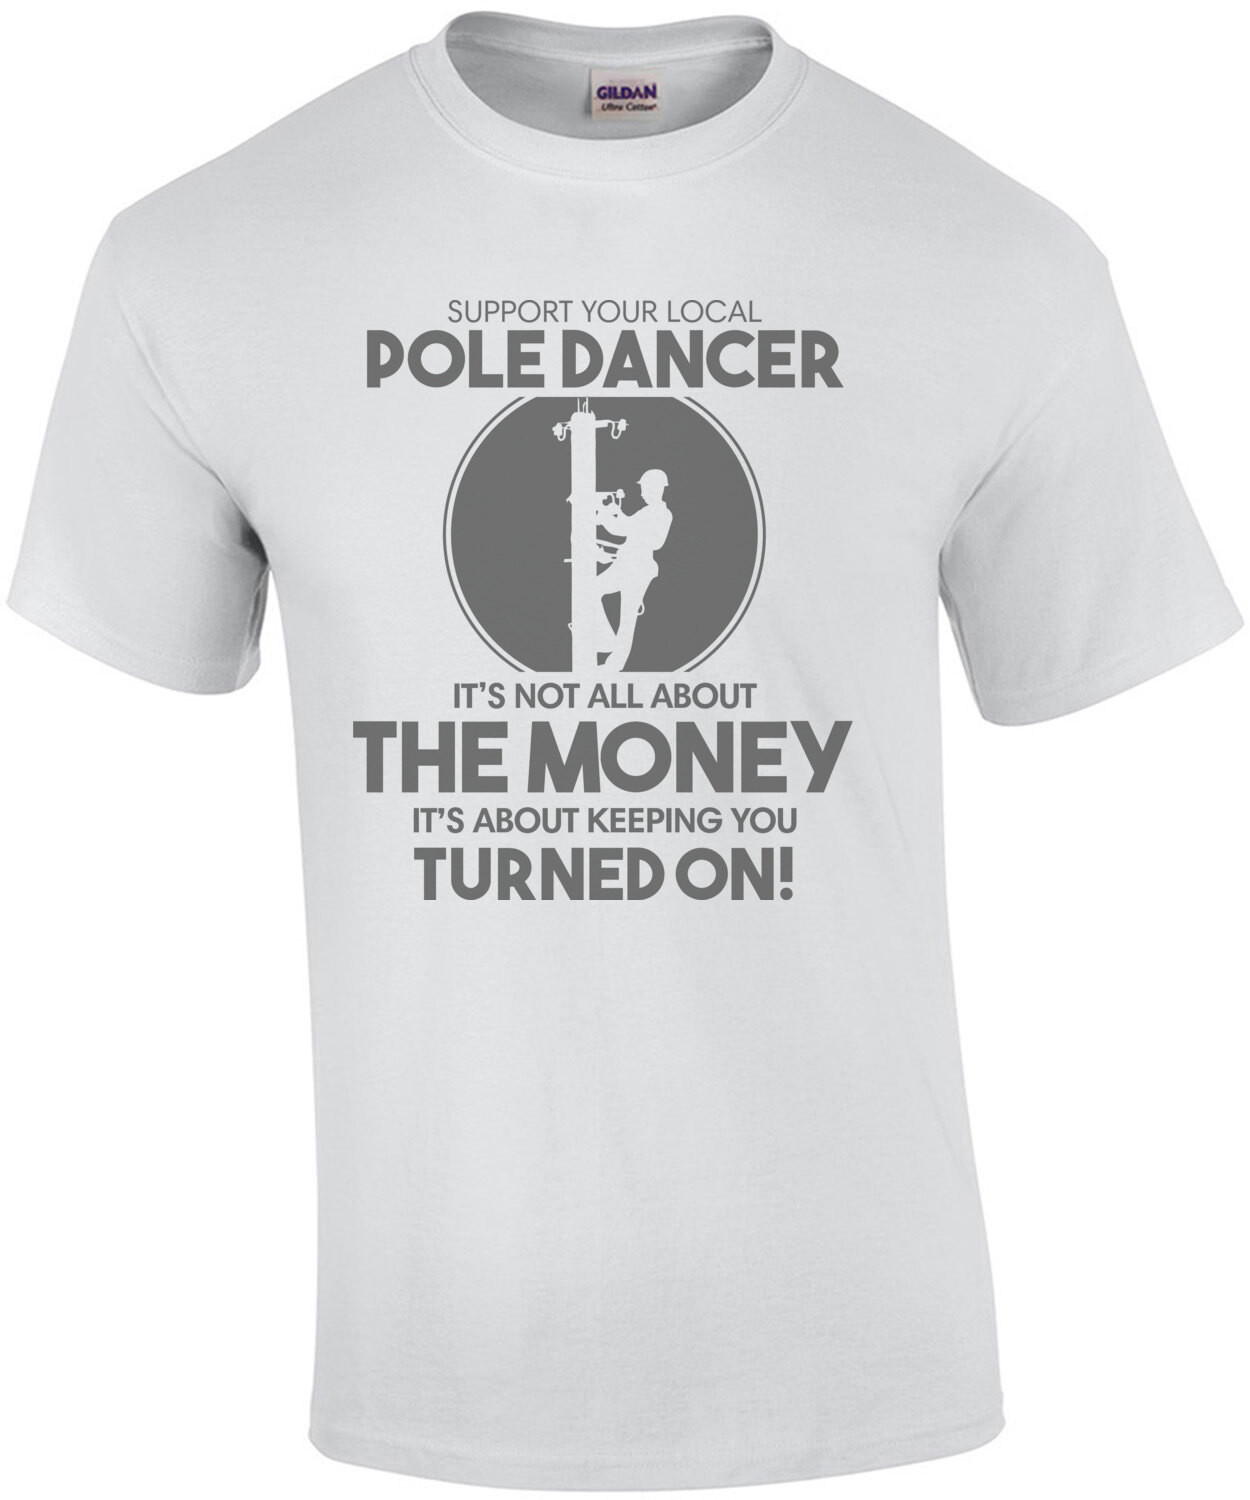 Support your local pole dancer. It's not all about the money. It's about keeping you turned on. Funny Pun T-Shirt